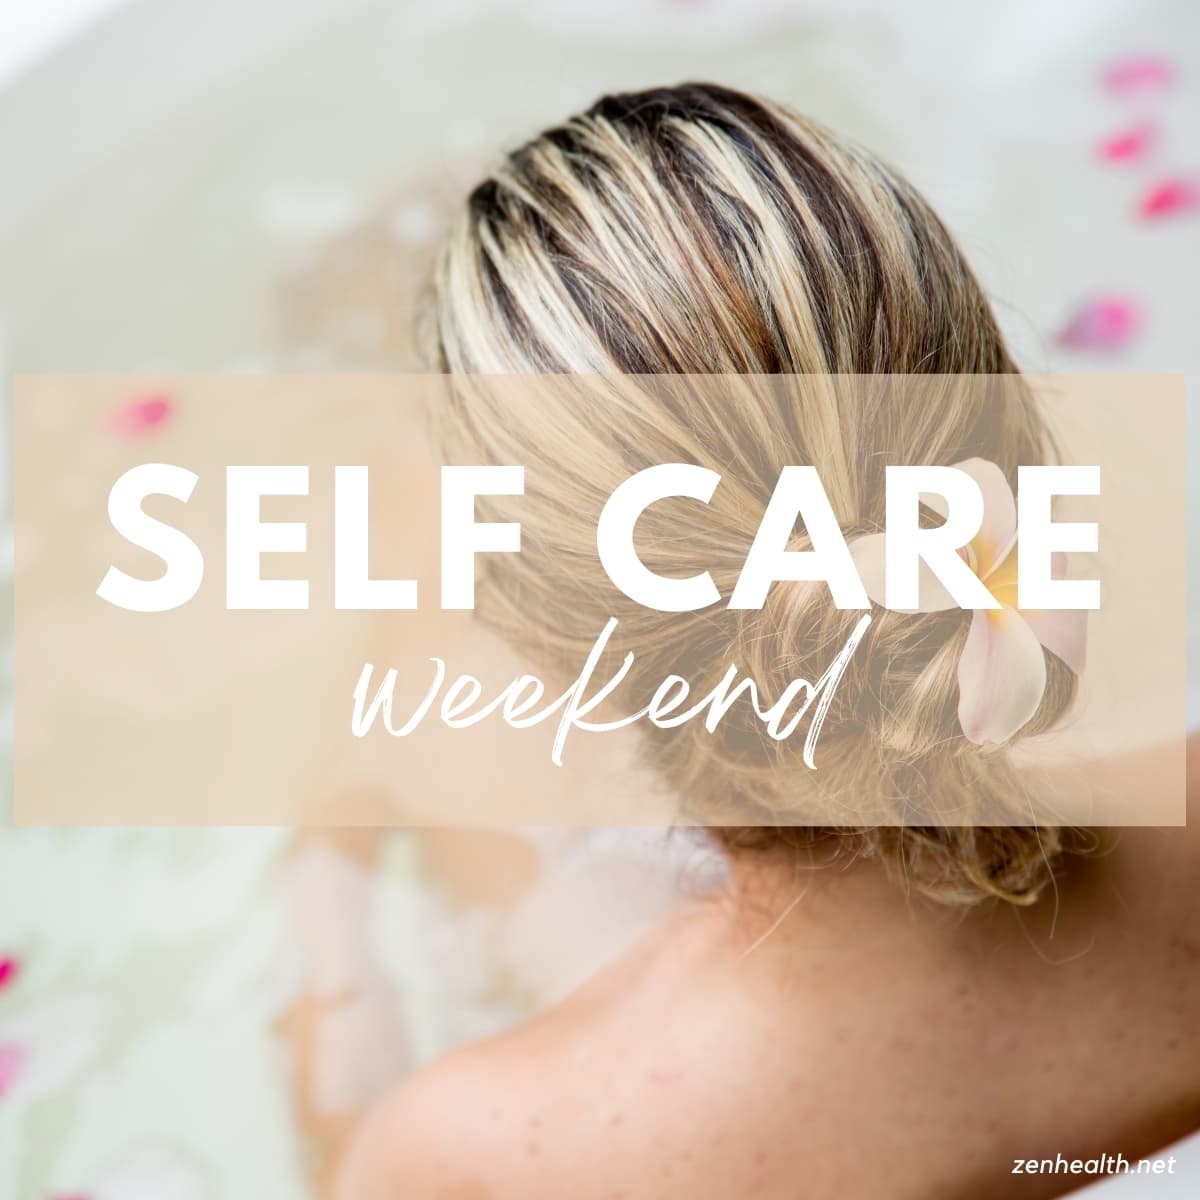 self care weekend text overlay on a photo of a woman in a tub with flowers in her hair and in the water